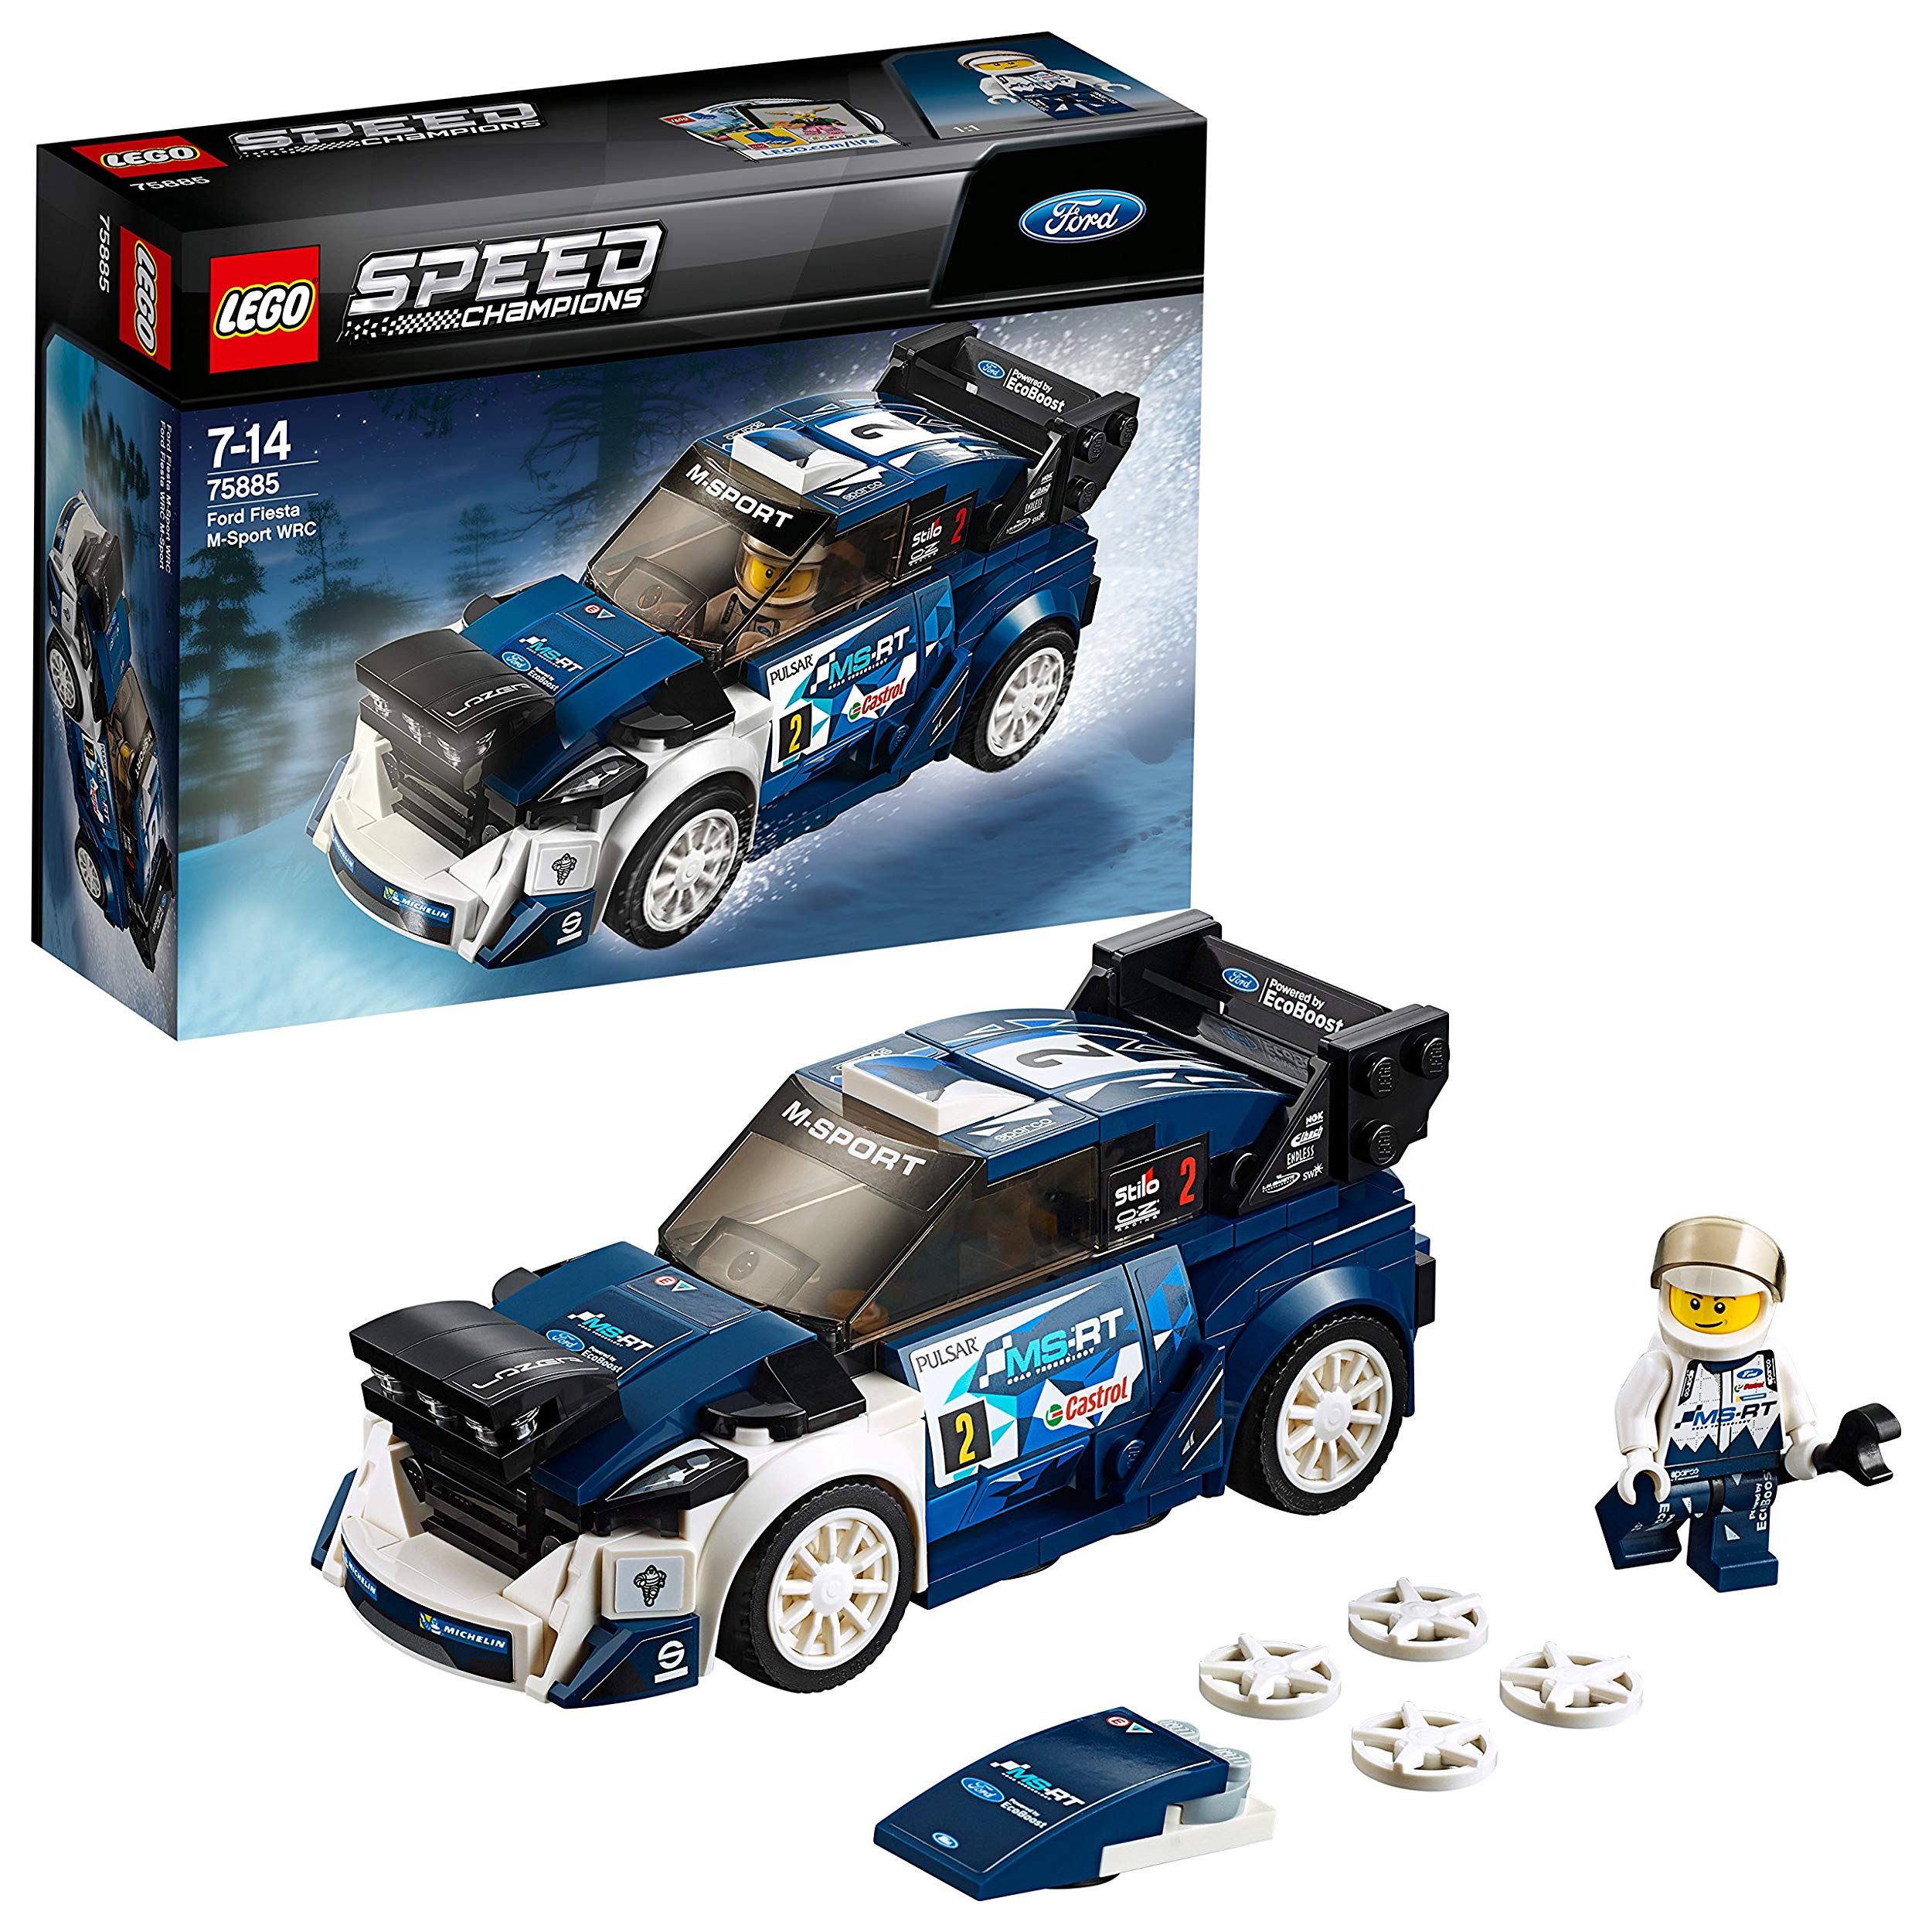 Lego Speed Champions Ford Fiesta M Sport Wrc Construction Toy